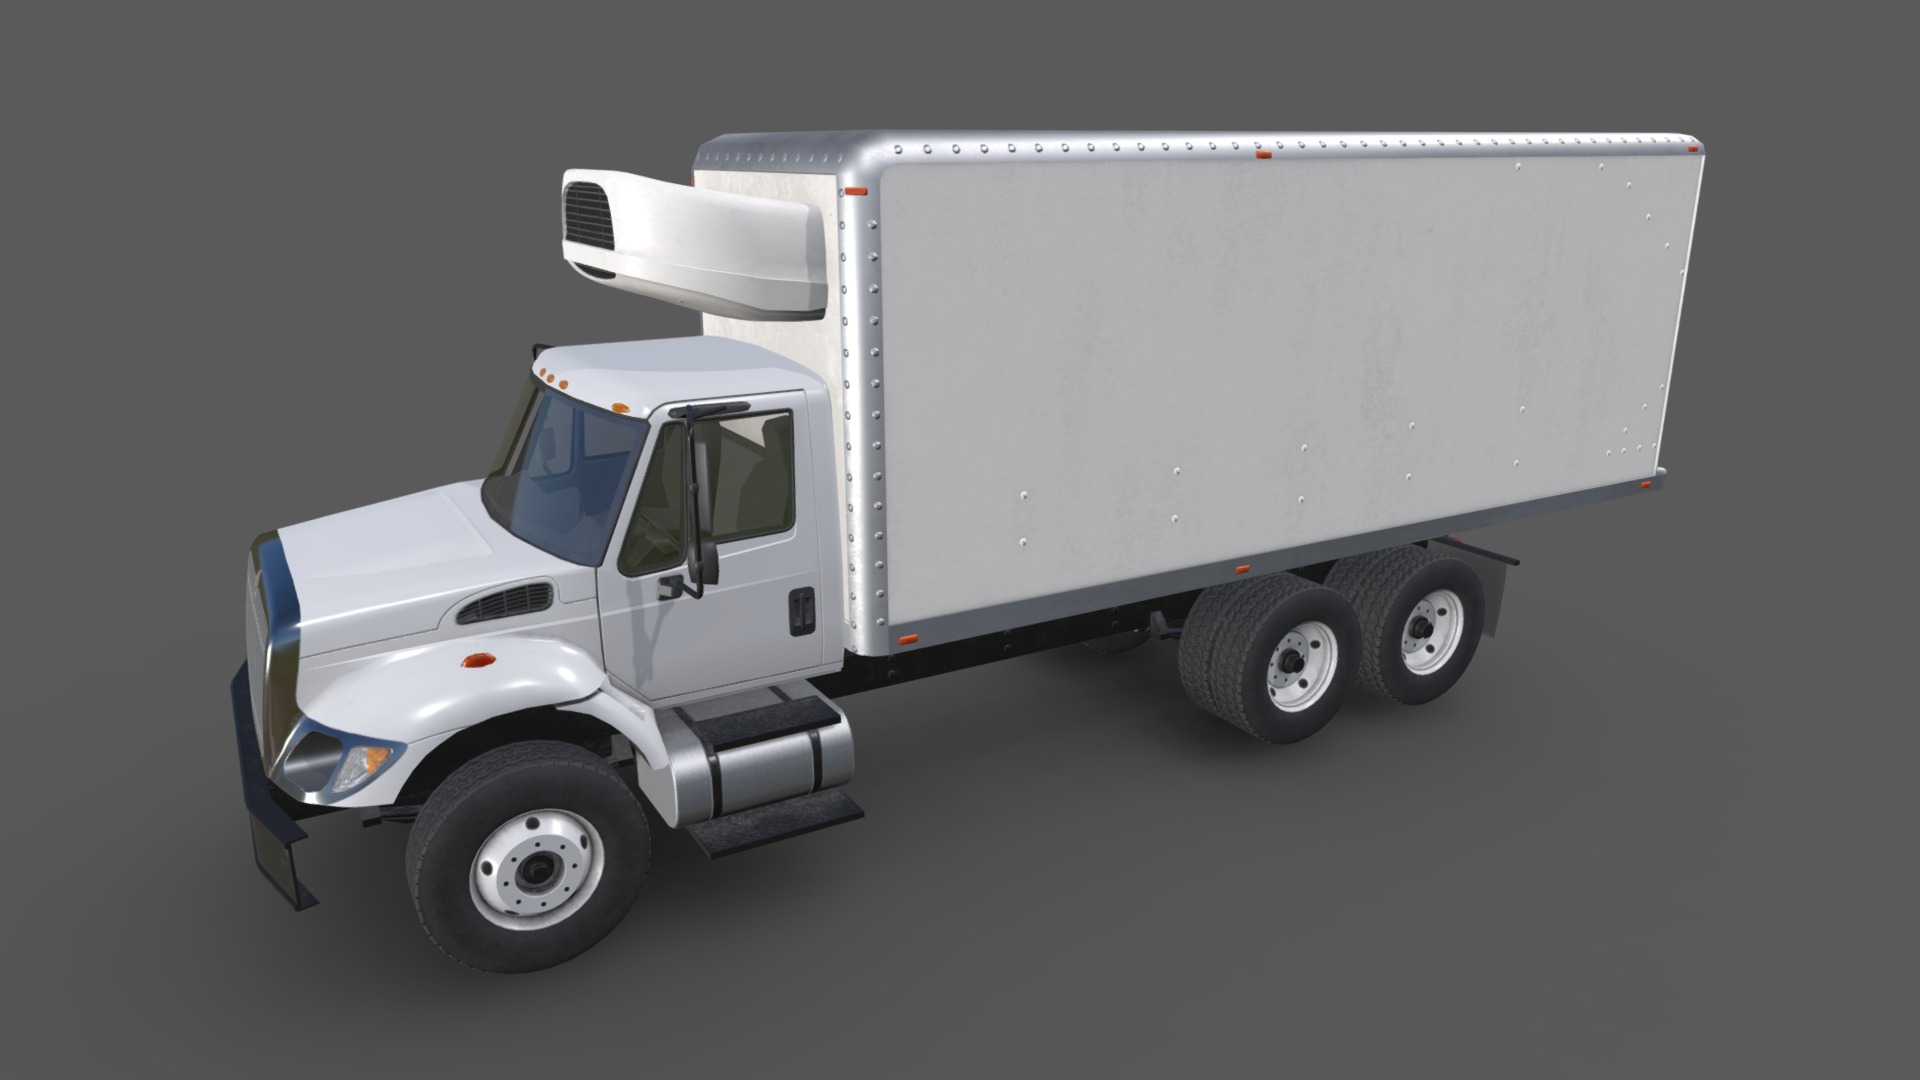 3D model International 7400 Fridge Truck - This is a 3D model of the International 7400 Fridge Truck. The 3D model is about a white truck with a trailer.